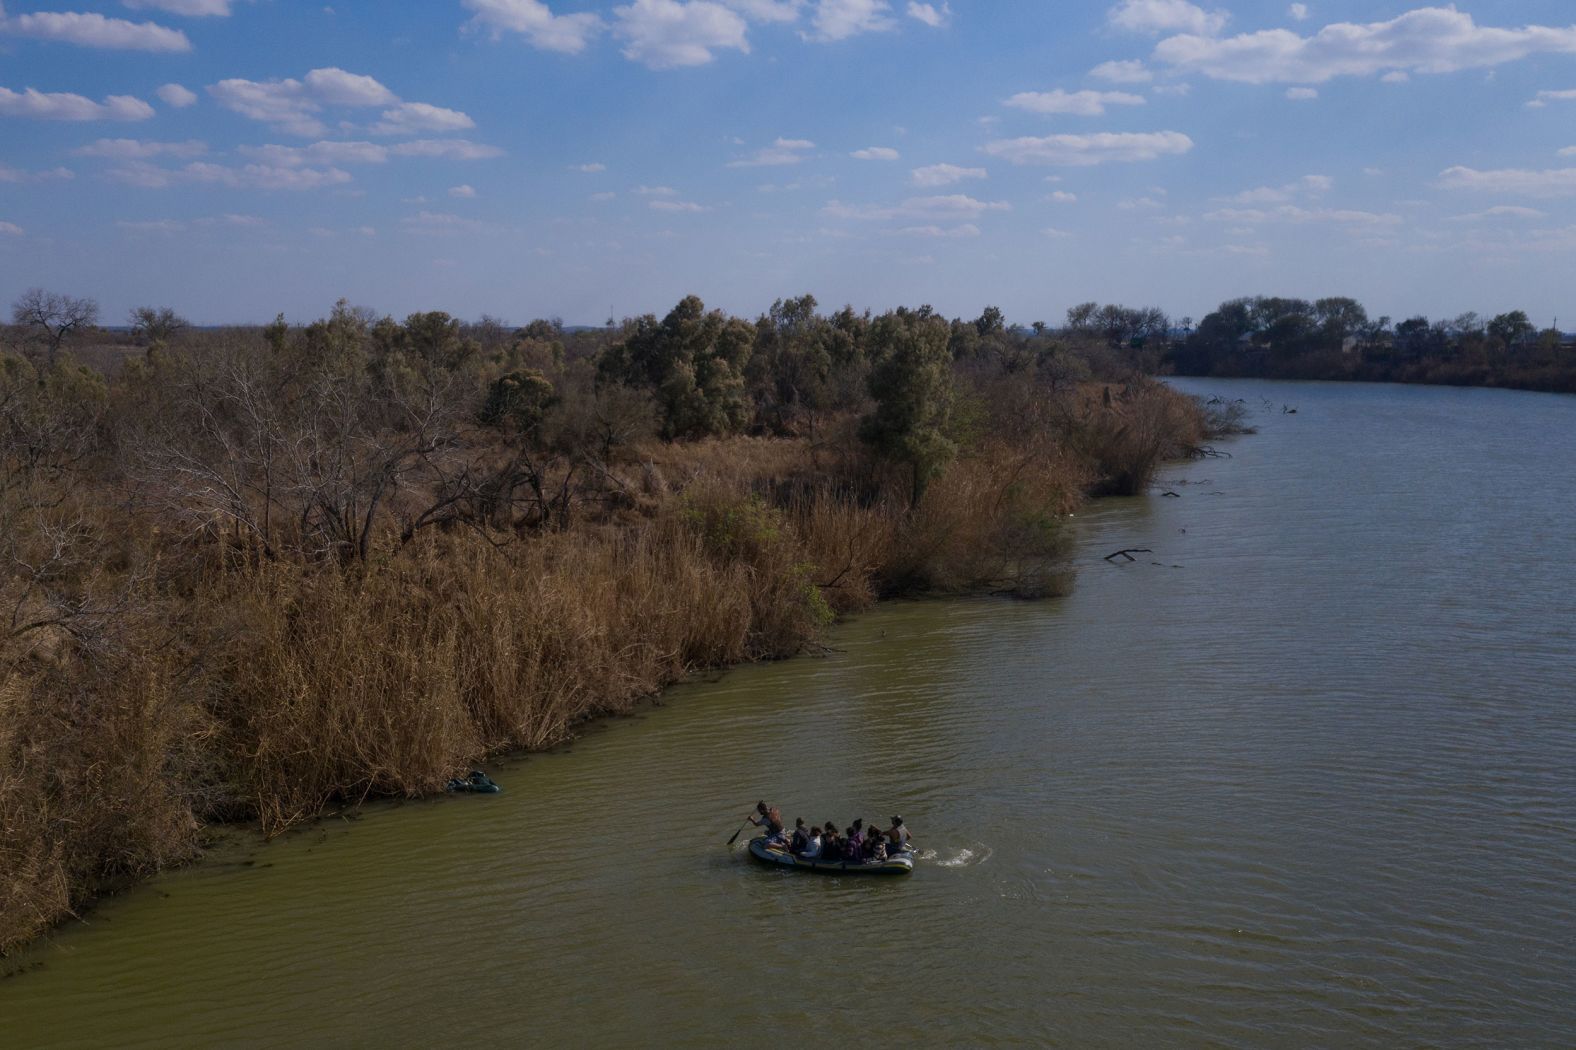 Smugglers use a raft to transport migrant families and children across the Rio Grande into Texas on March 6.